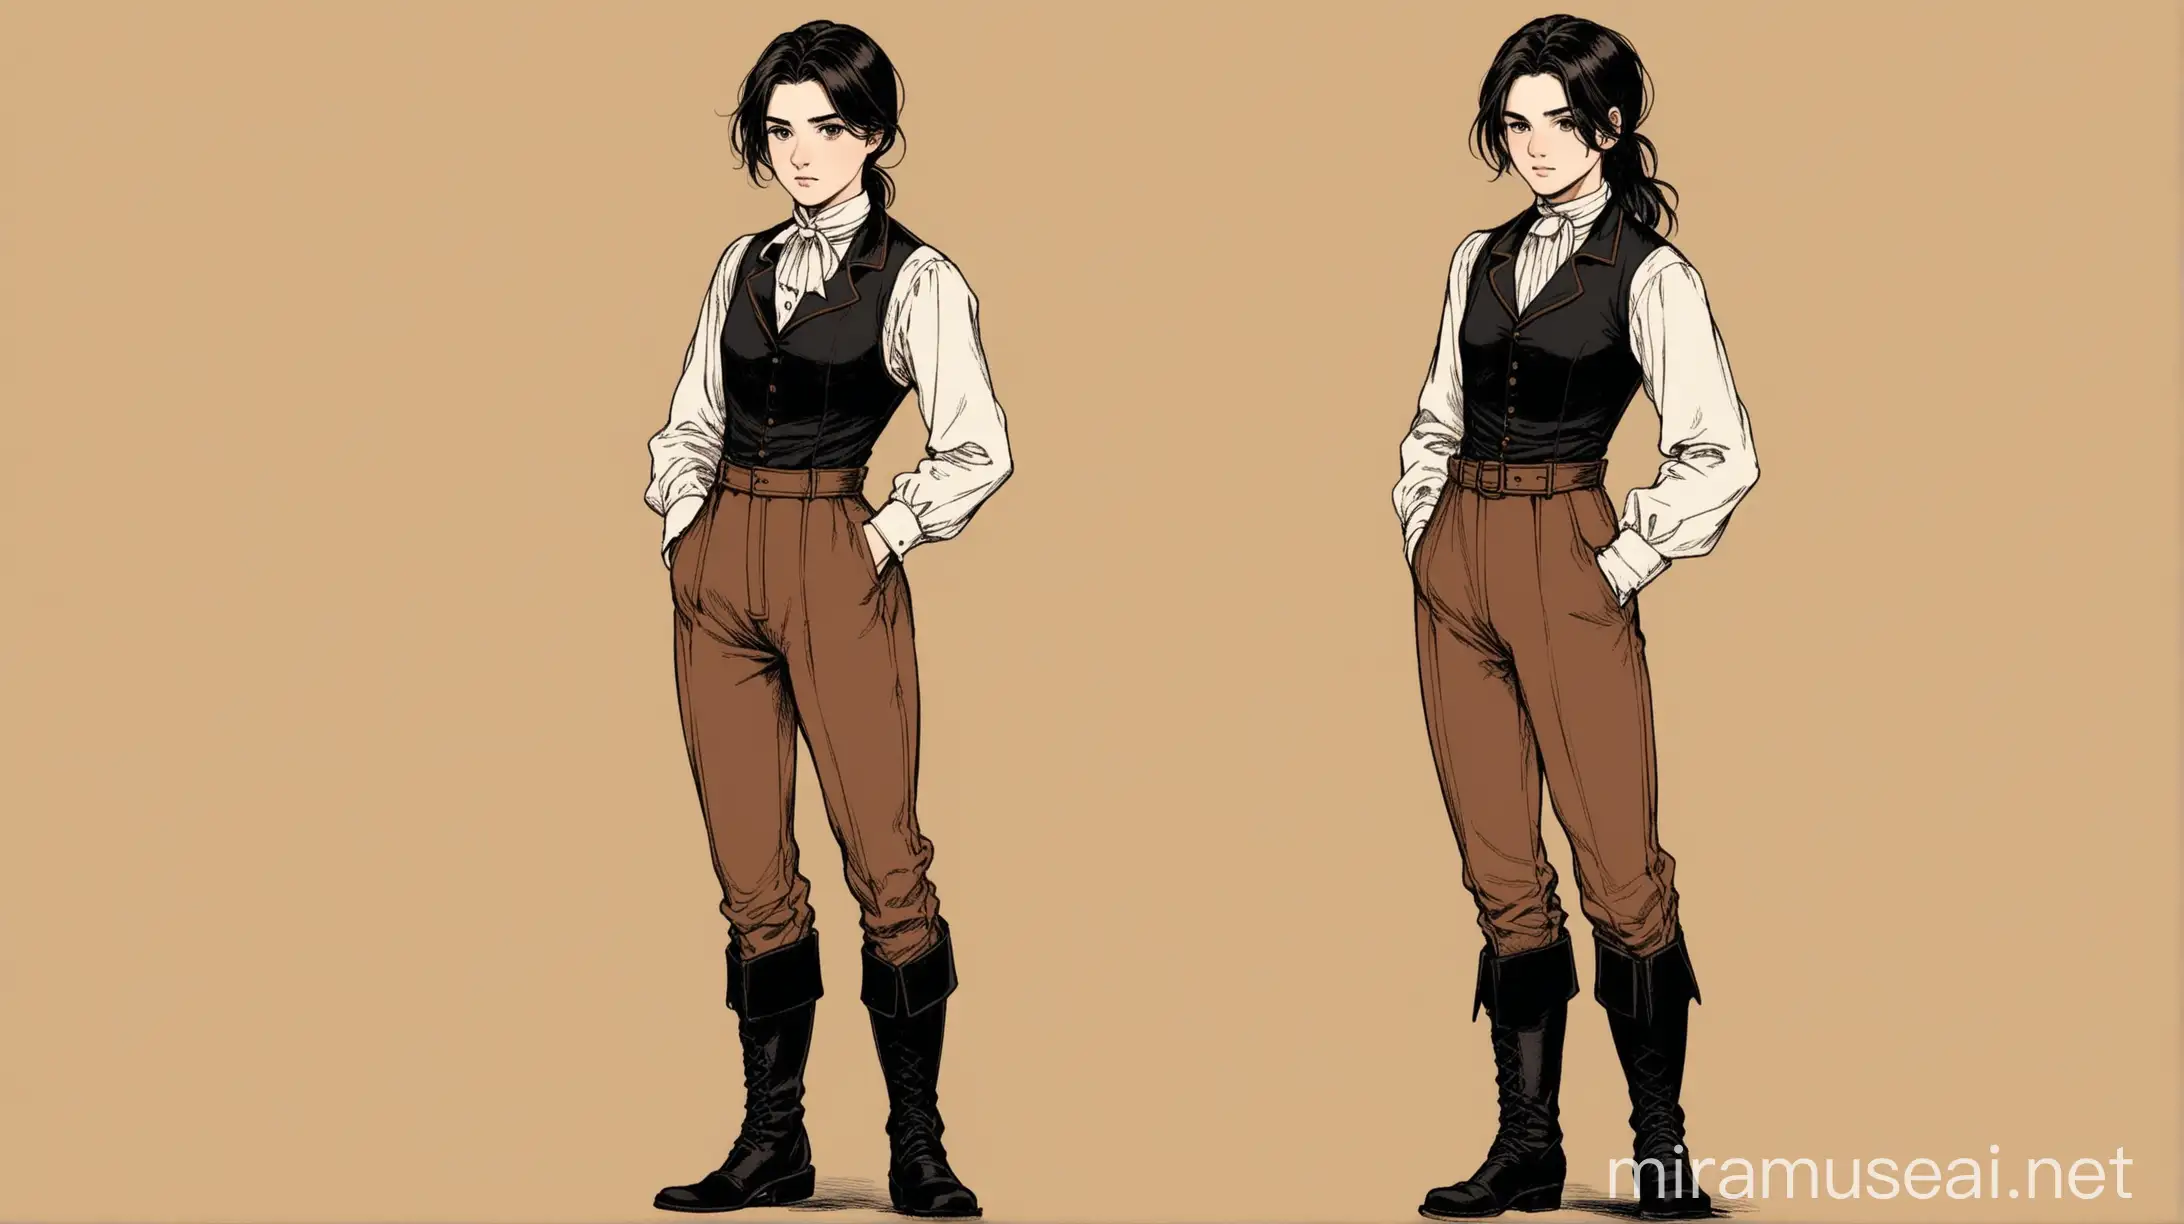 Historical RolePlaying Girl as a Man in Poet Shirt and Leather Boots